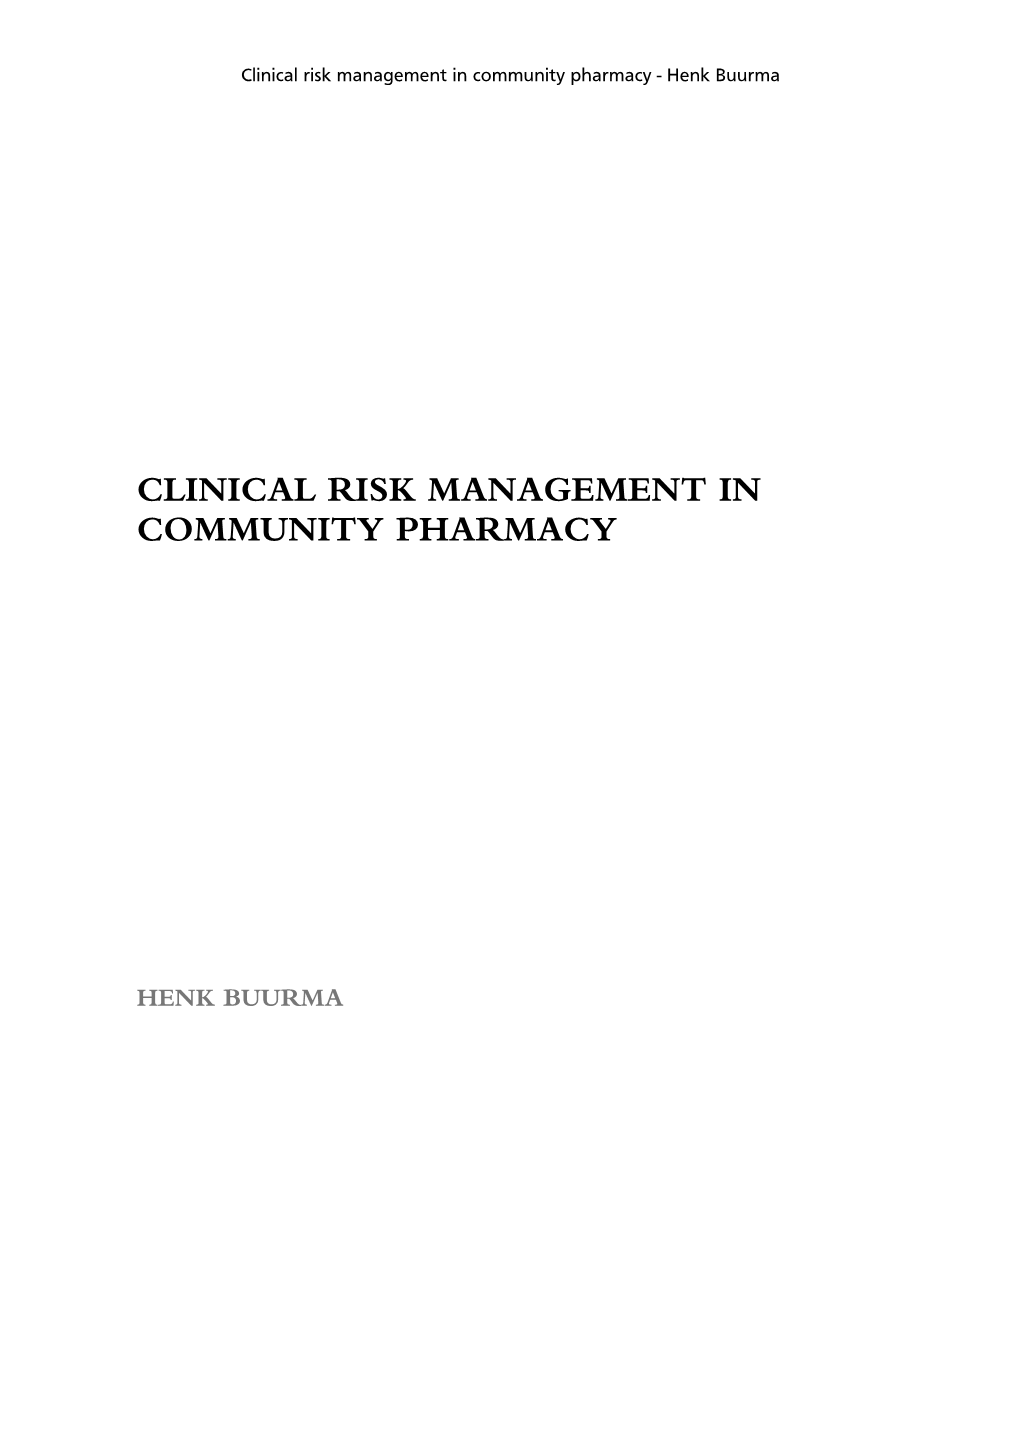 Clinical Risk Management in Community Pharmacy - Henk Buurma